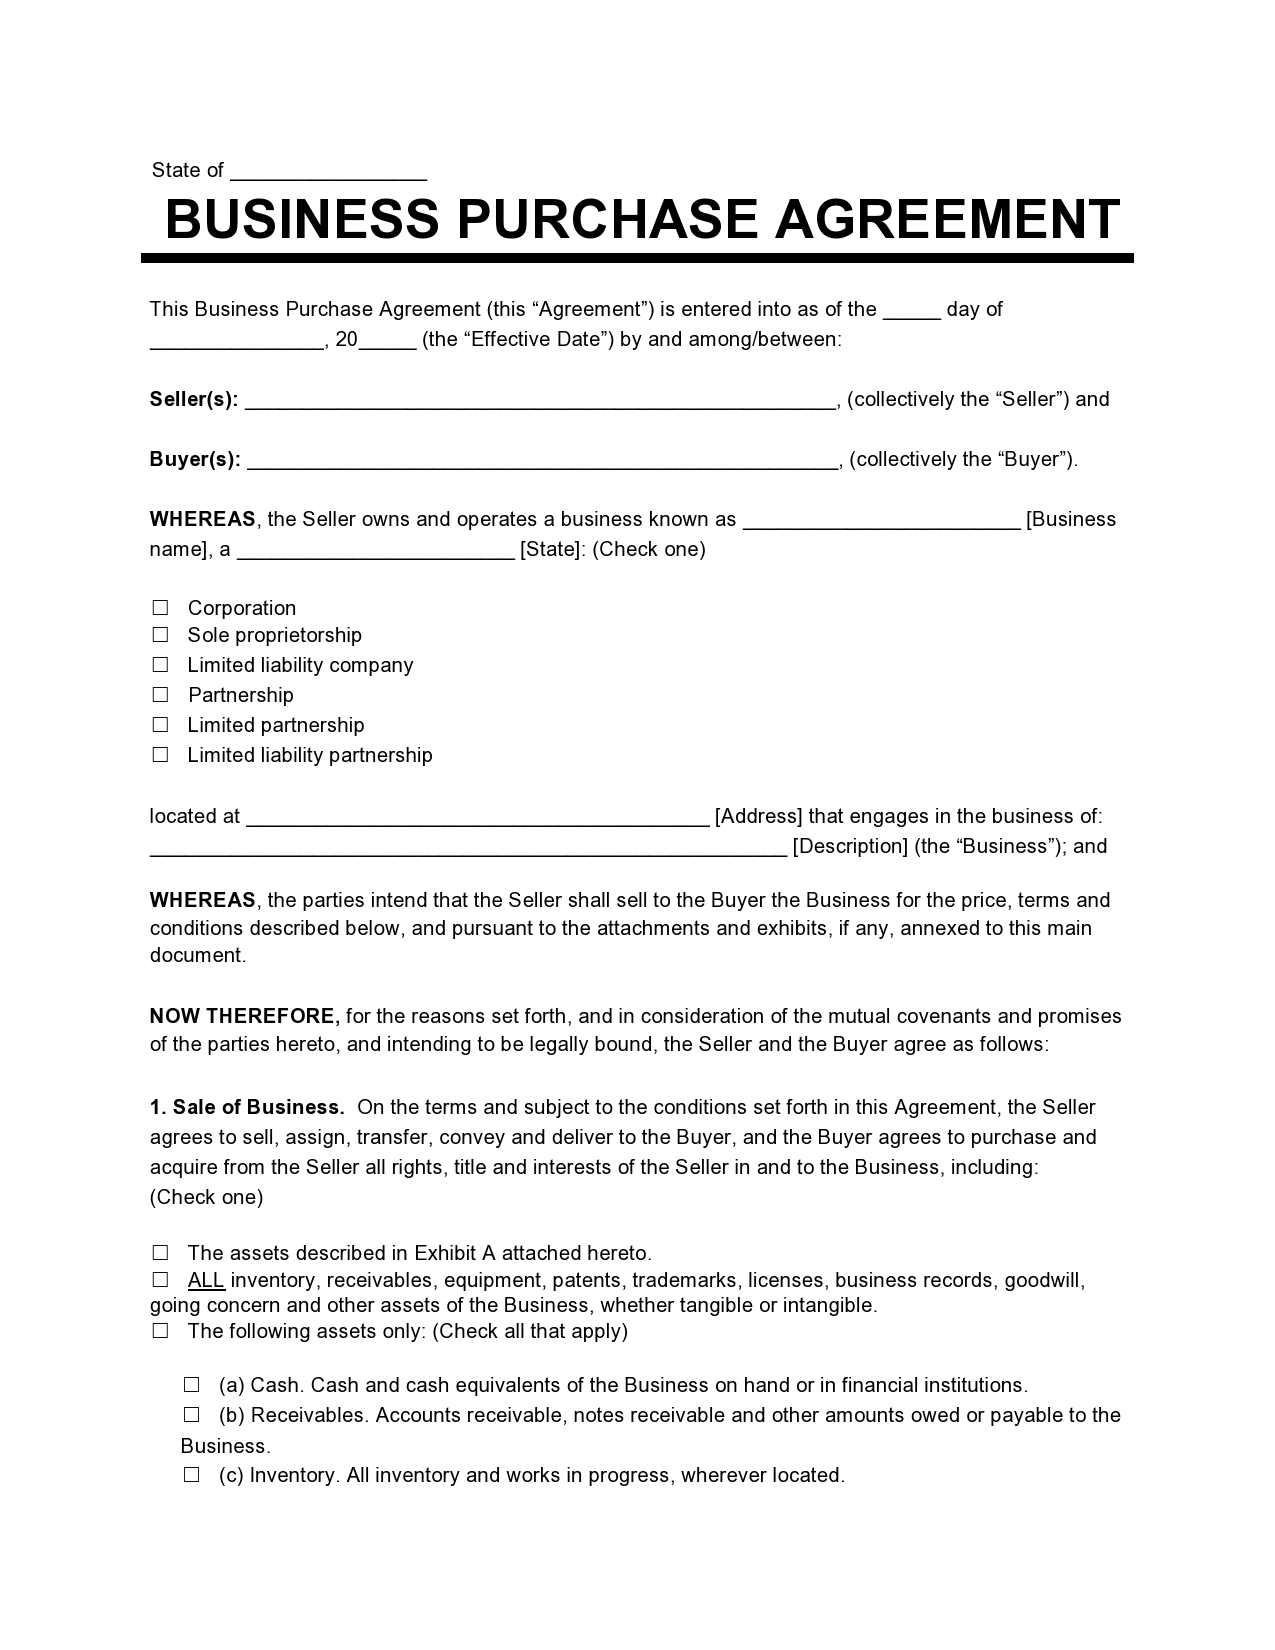 Free business purchase agreement 01